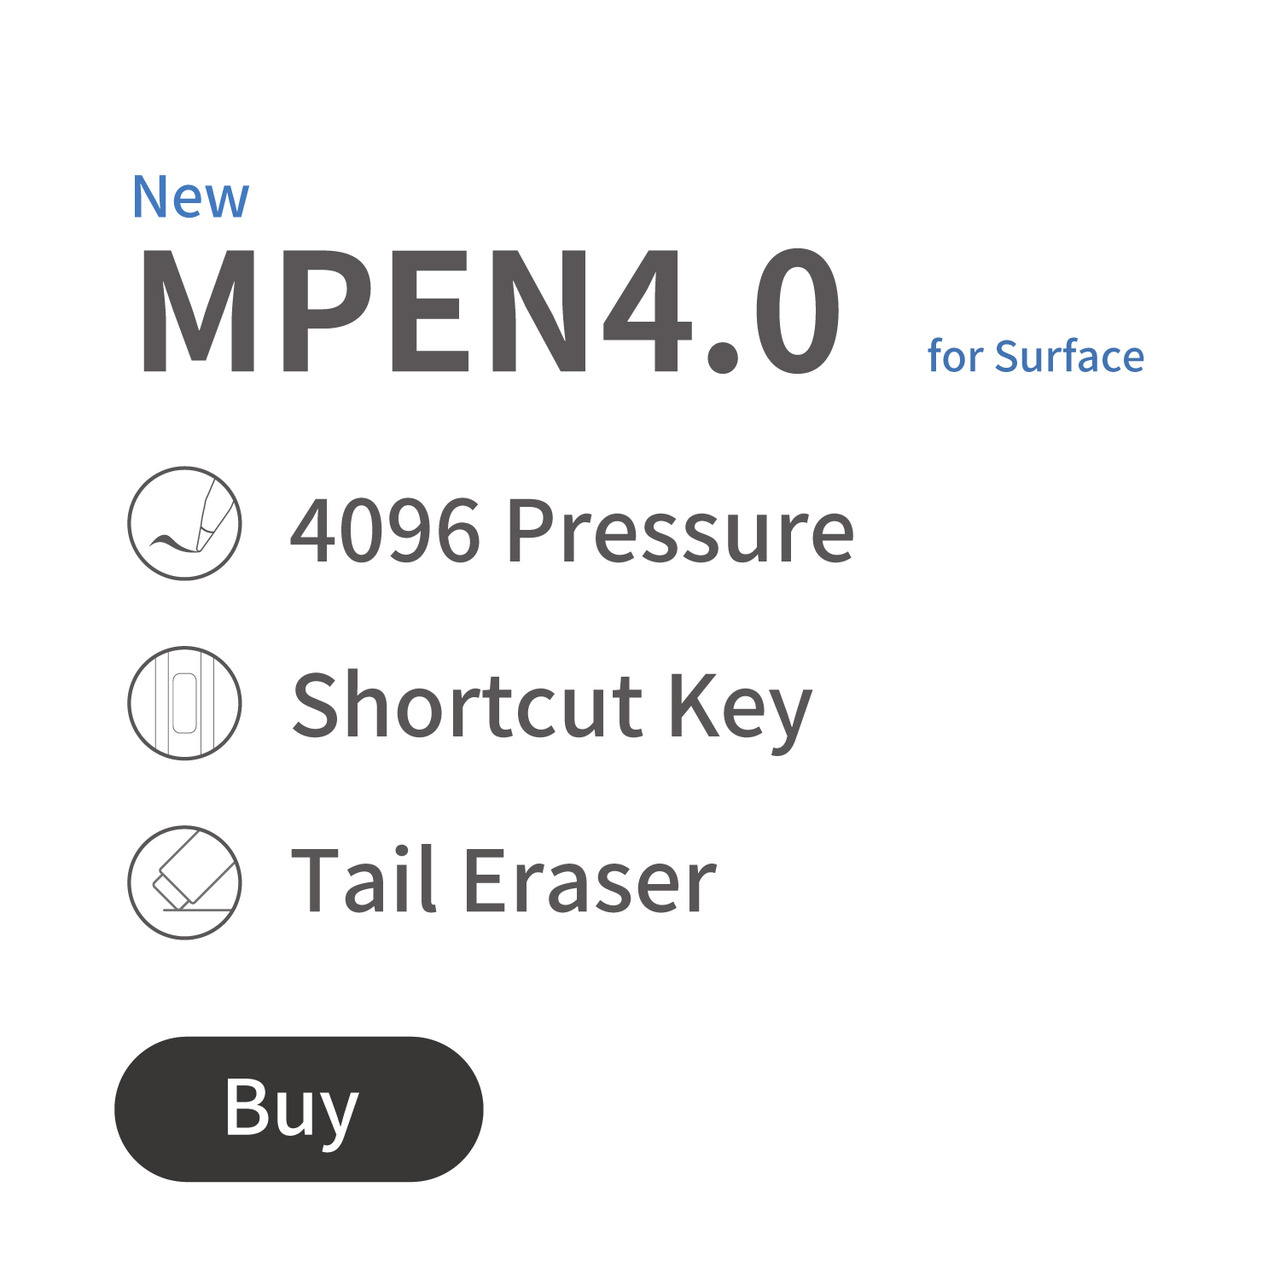 MPEN4.0 for Surface